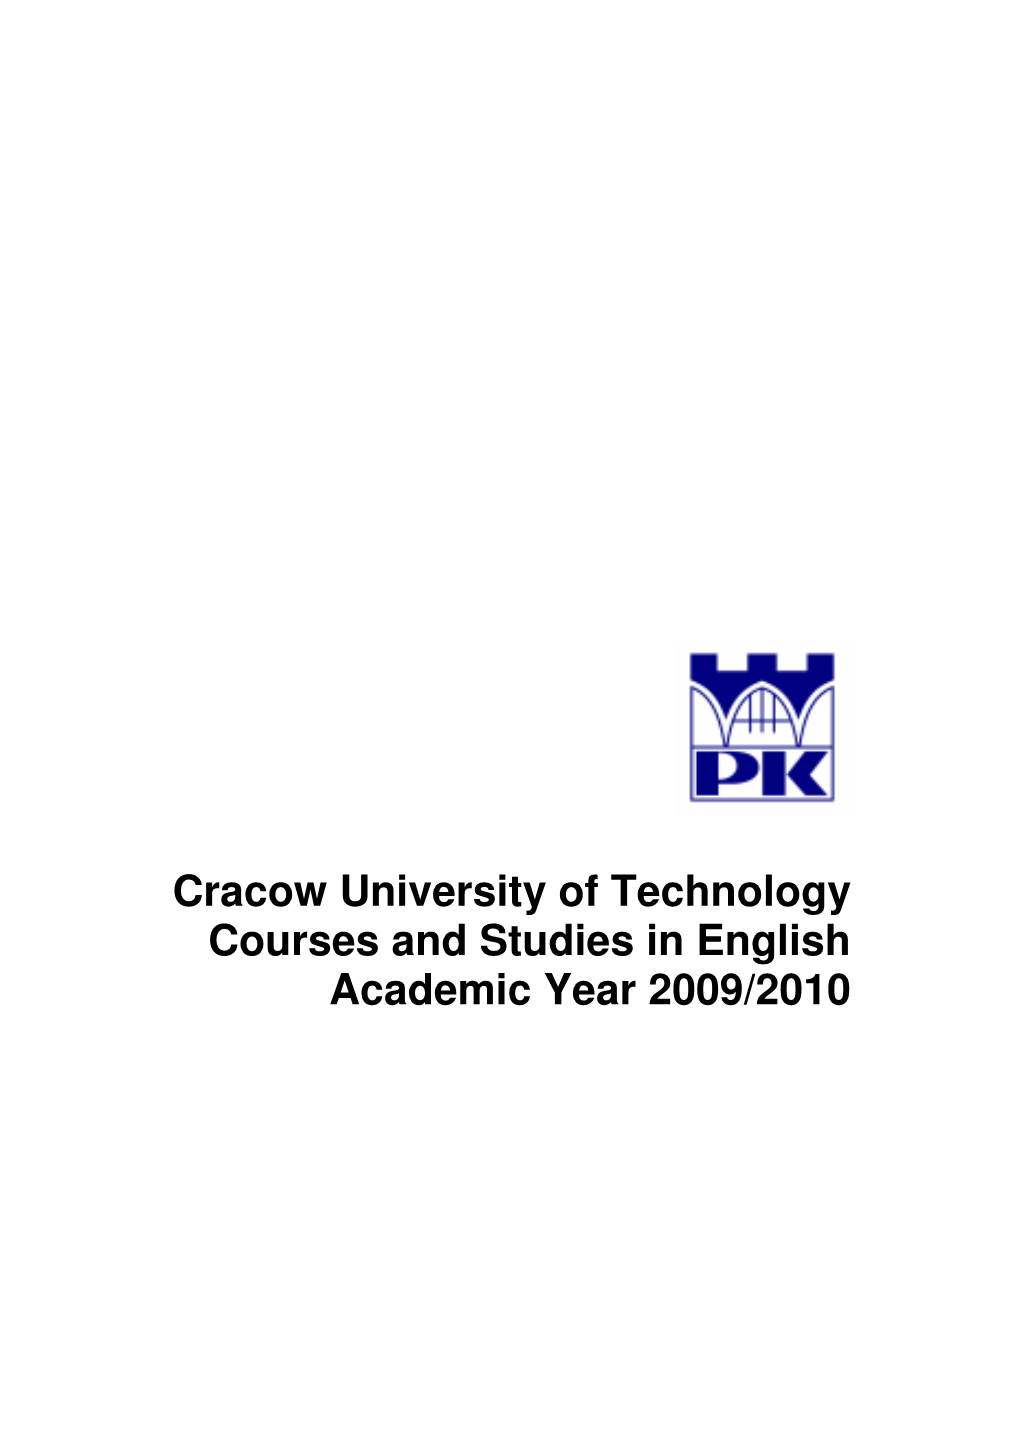 Cracow University of Technology Courses and Studies in English Academic Year 2009/2010